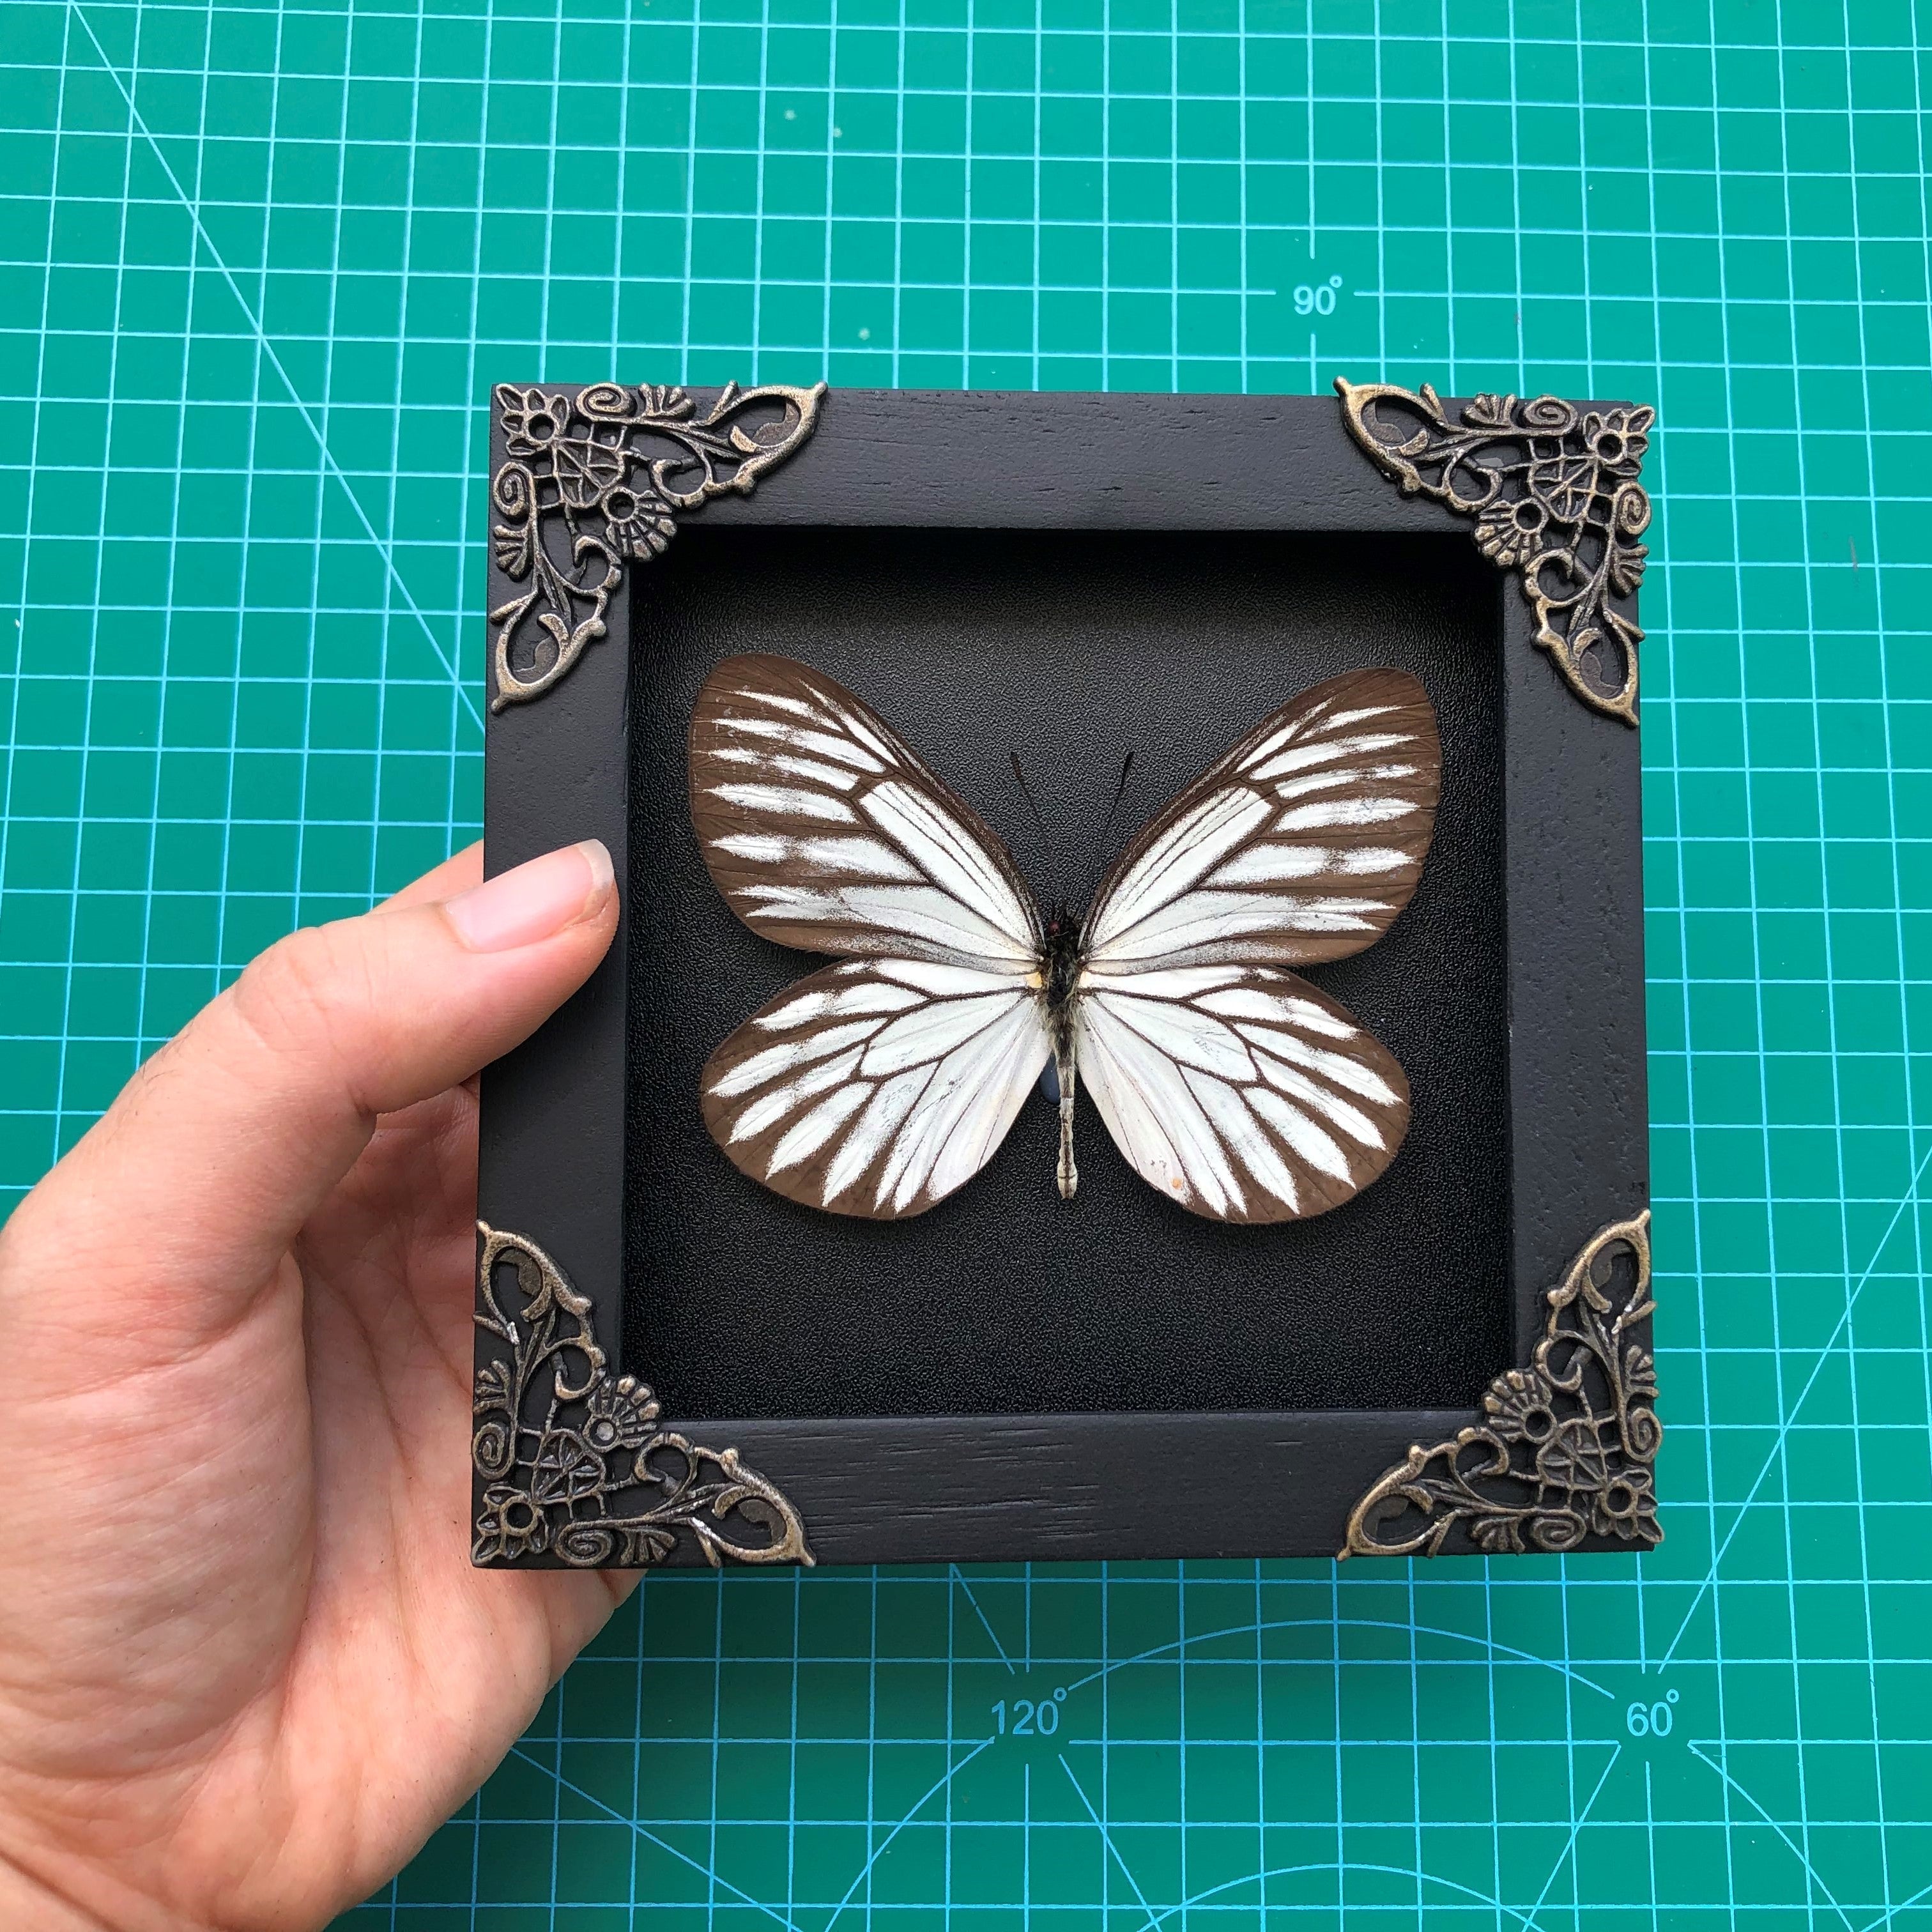 Real Framed Butterfly Black Wooden Shadow Box Dried Insect Lover Taxidermy Dead Bug Taxadermy Specimen Display Wall Art Hanging Decoration - Vinacreations